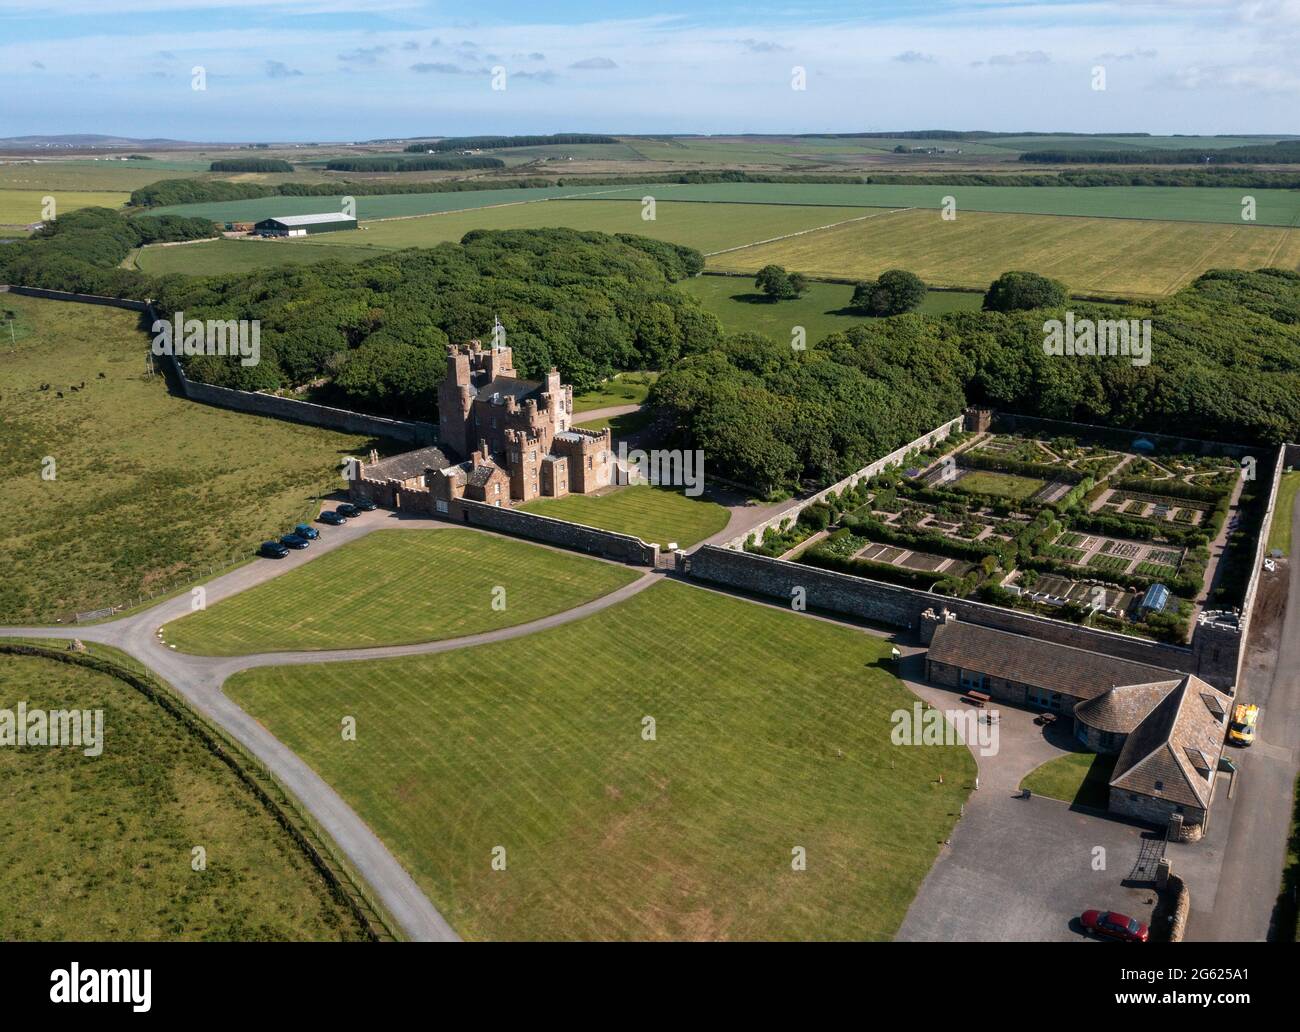 Aerial view of the Castle of Mey and gardens, the former home of the Queen Mother, overlooking the Pentland Firth, Caithness, Scotland. Stock Photo